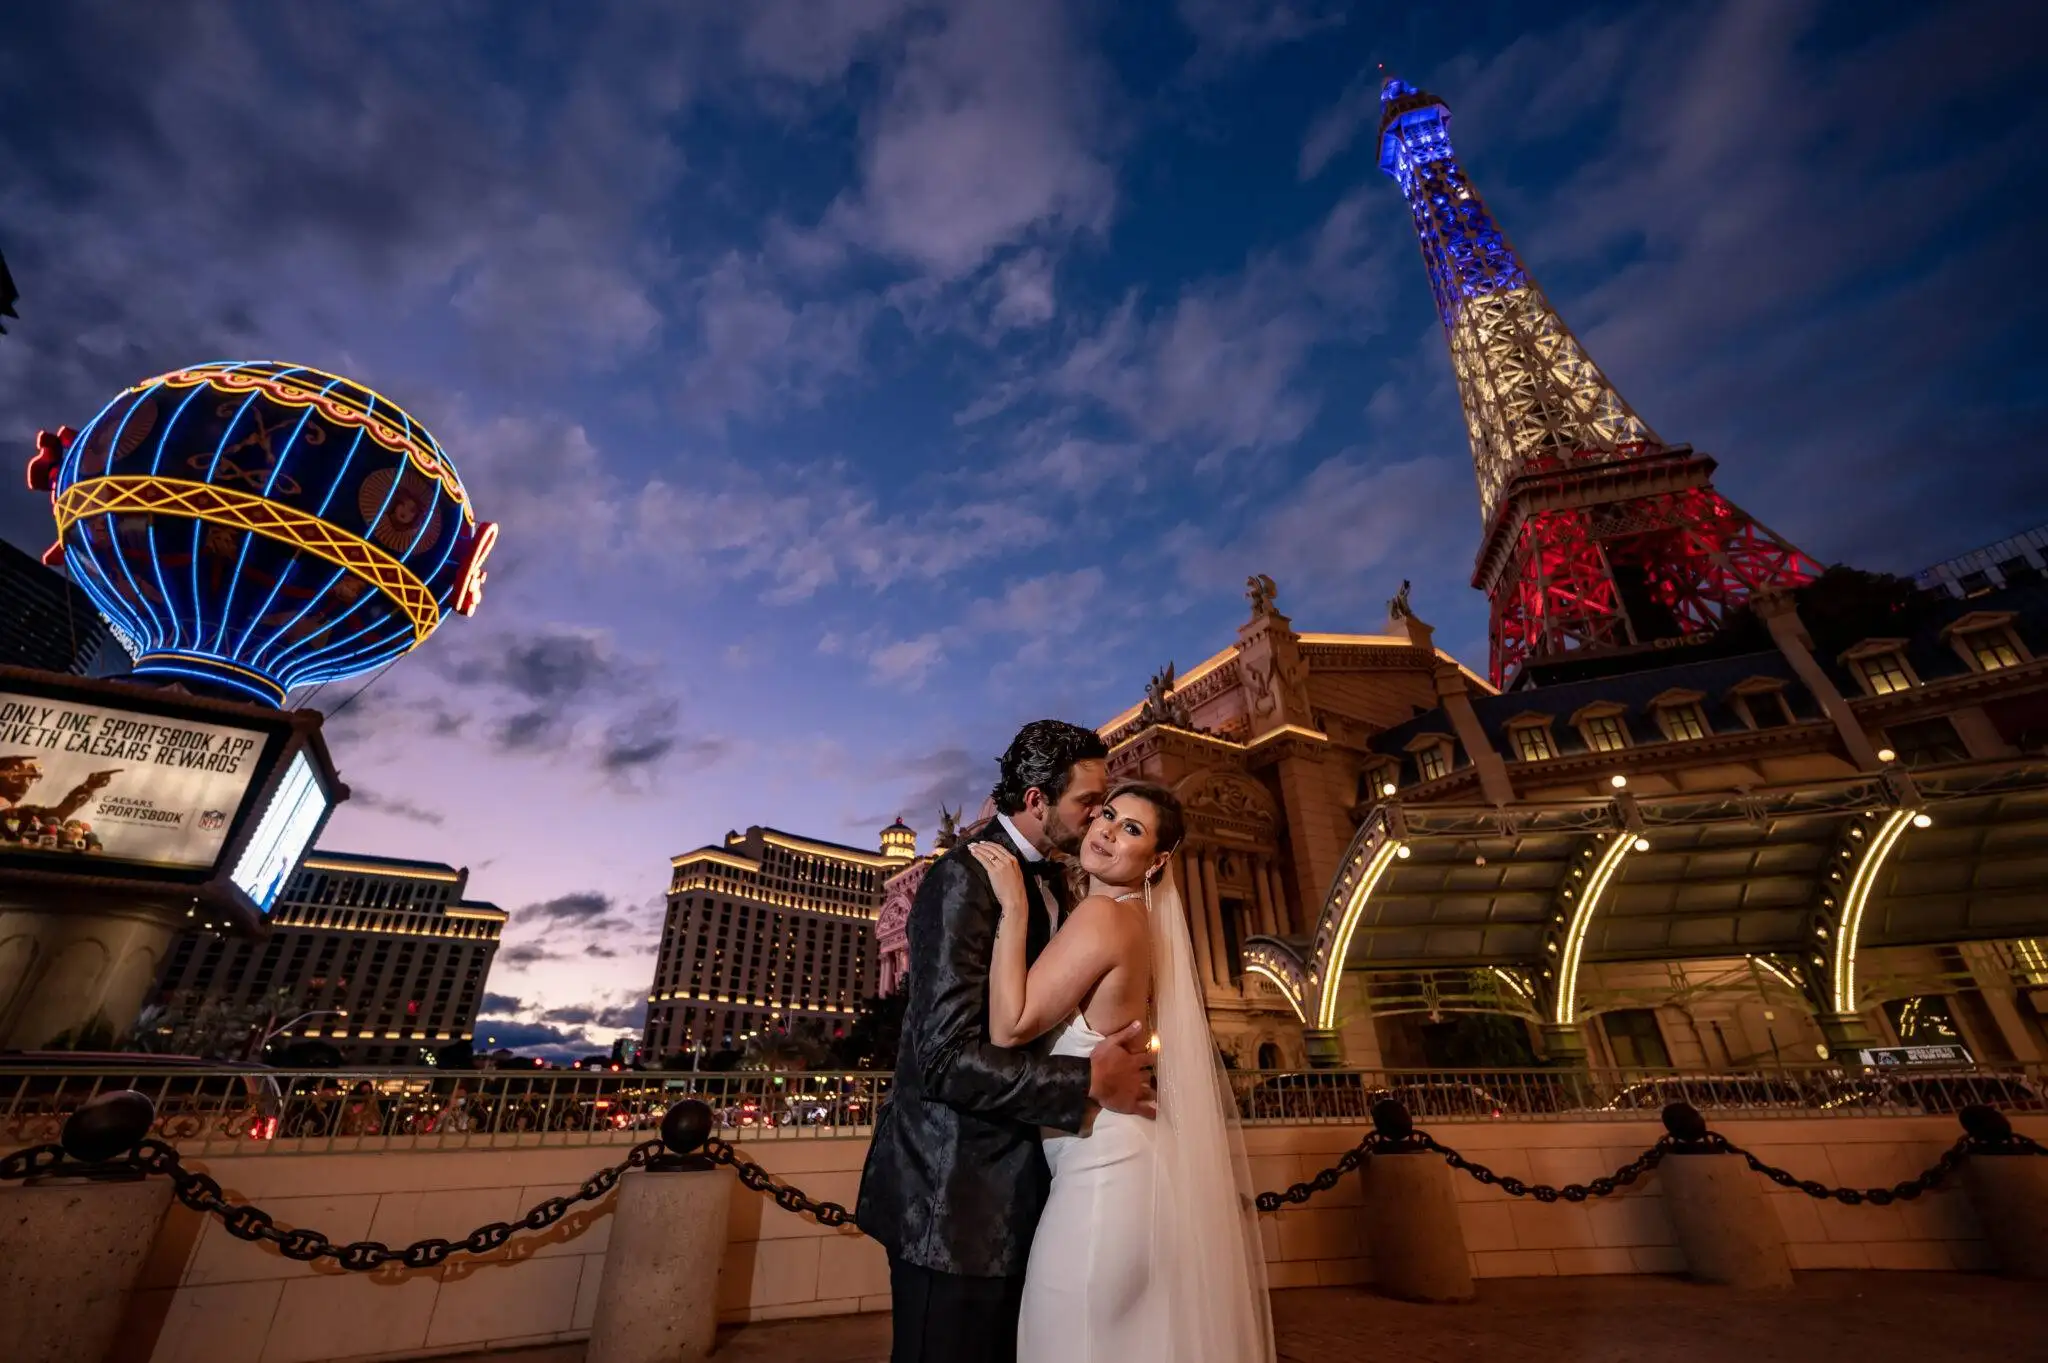 LV Photo - Your Event Photographers In Las Vegas and Beyond